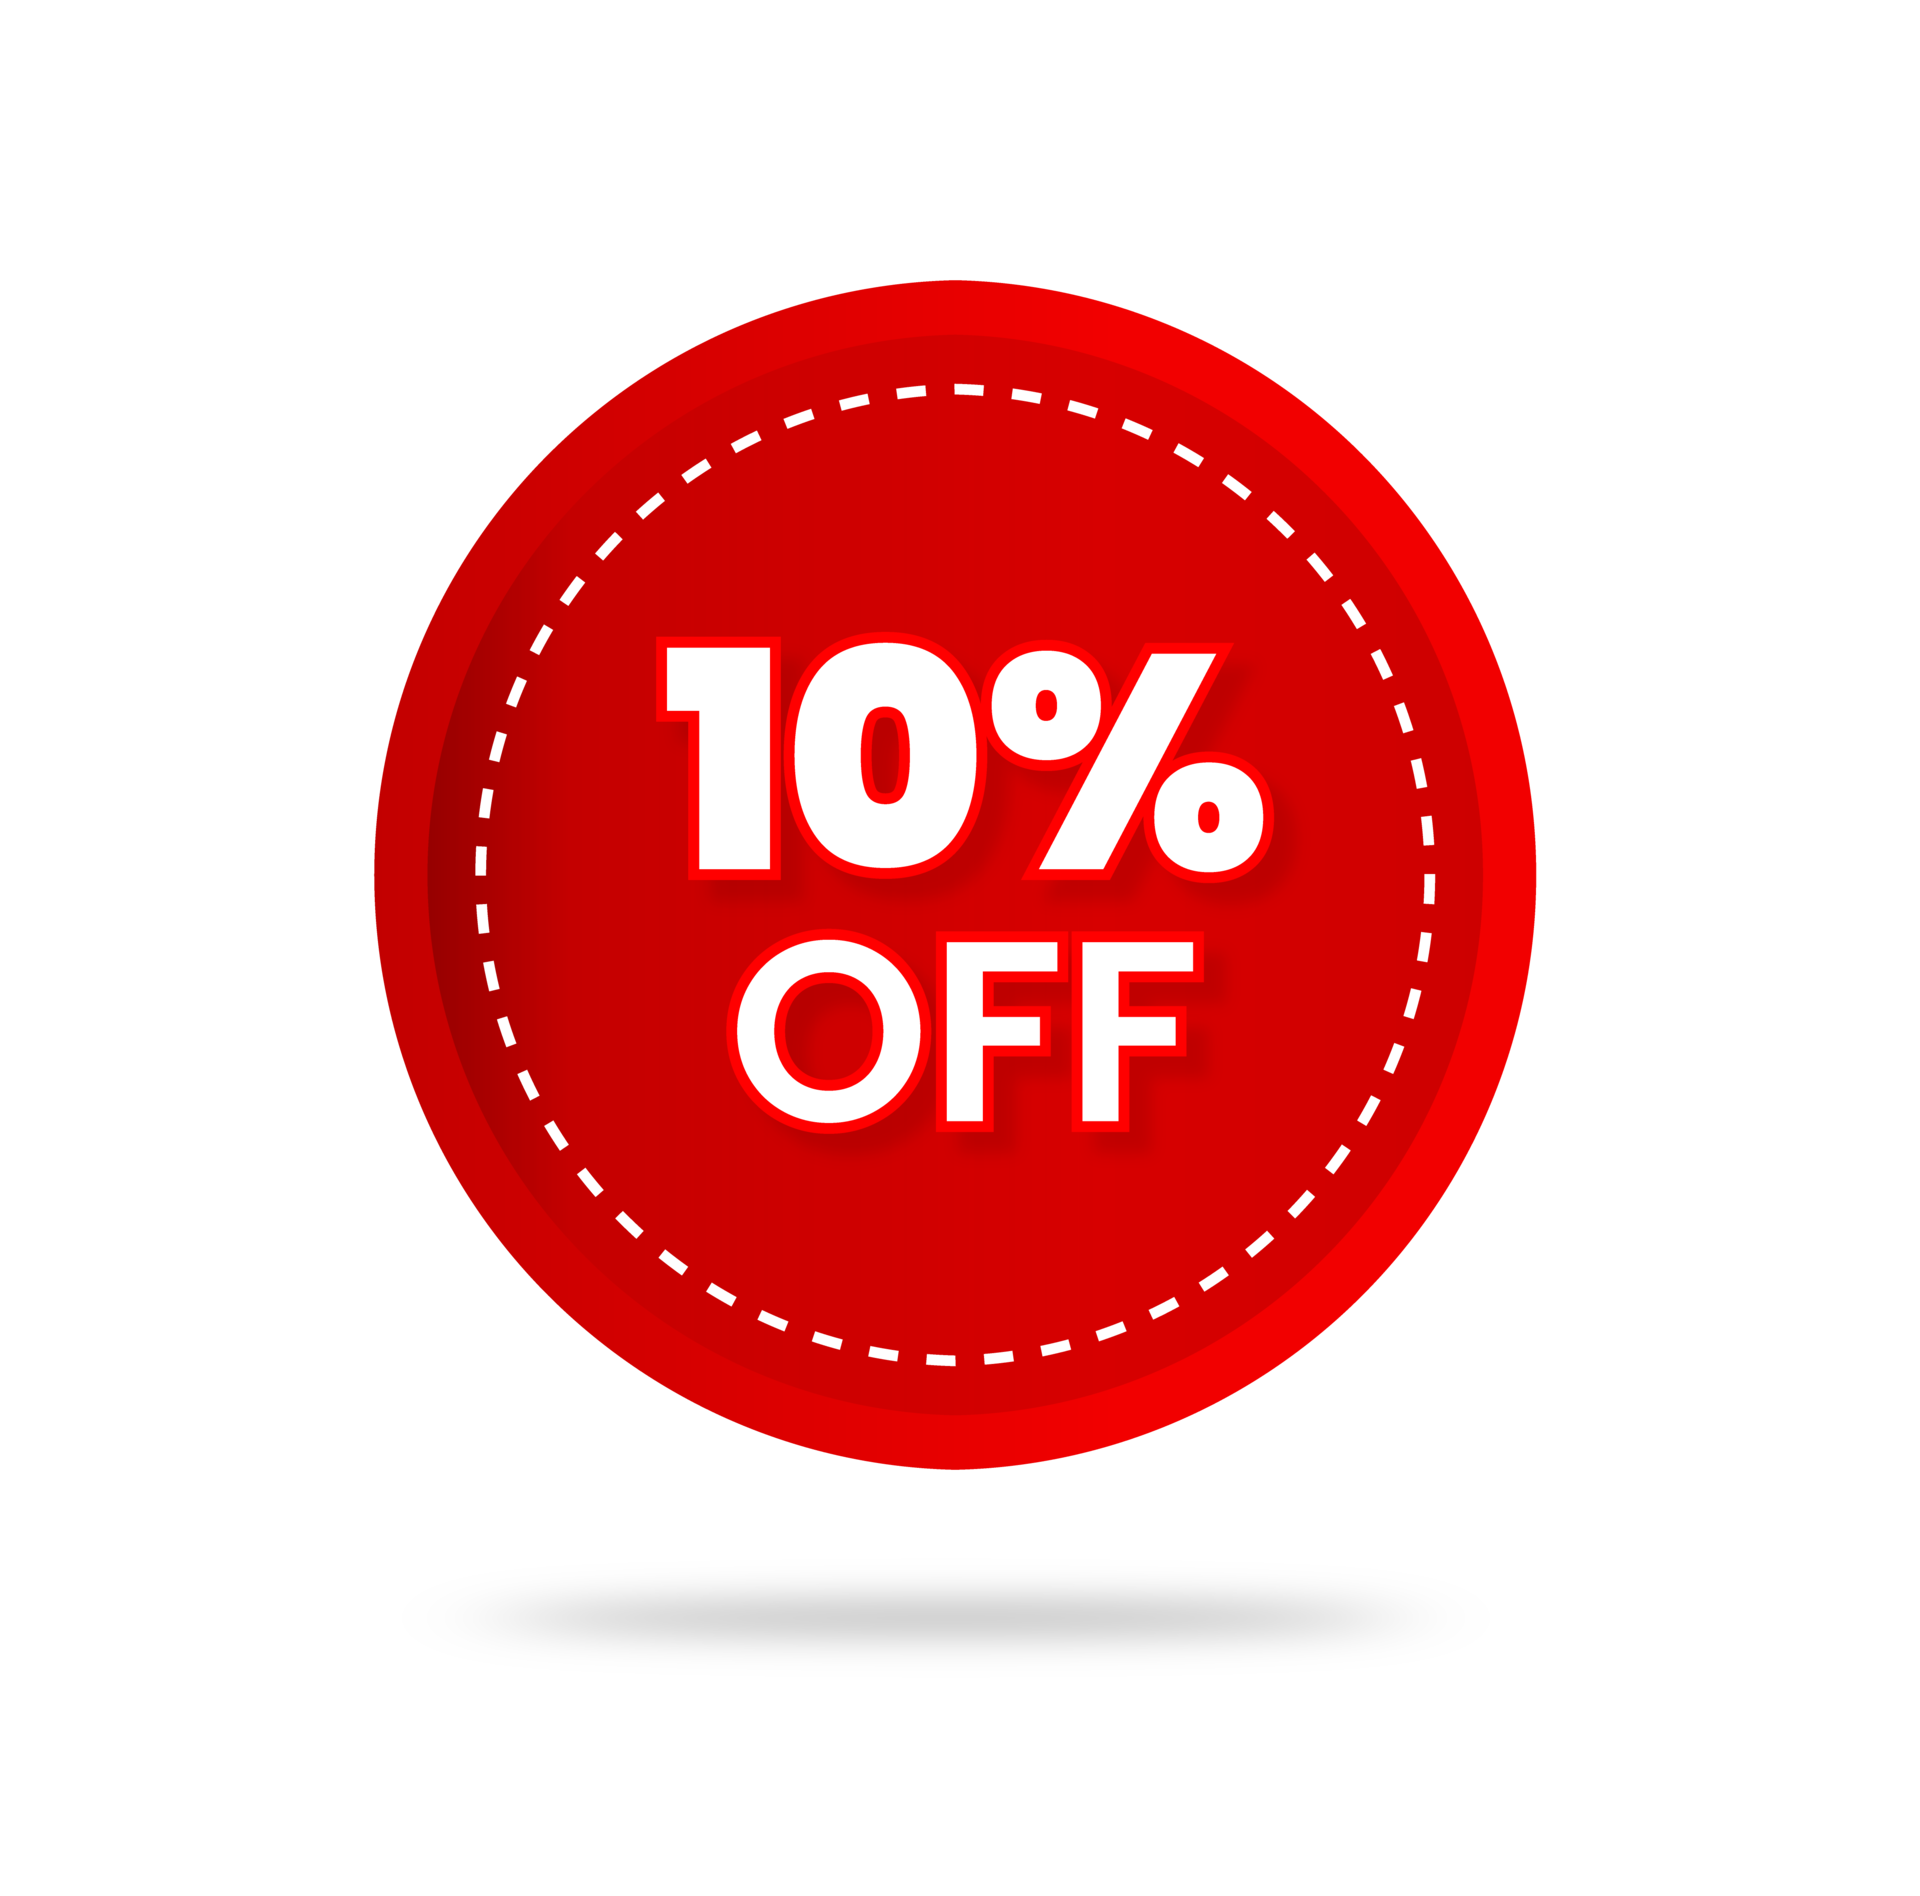 10 Percent Discount Sticker Price Tag Design Product Emblem With